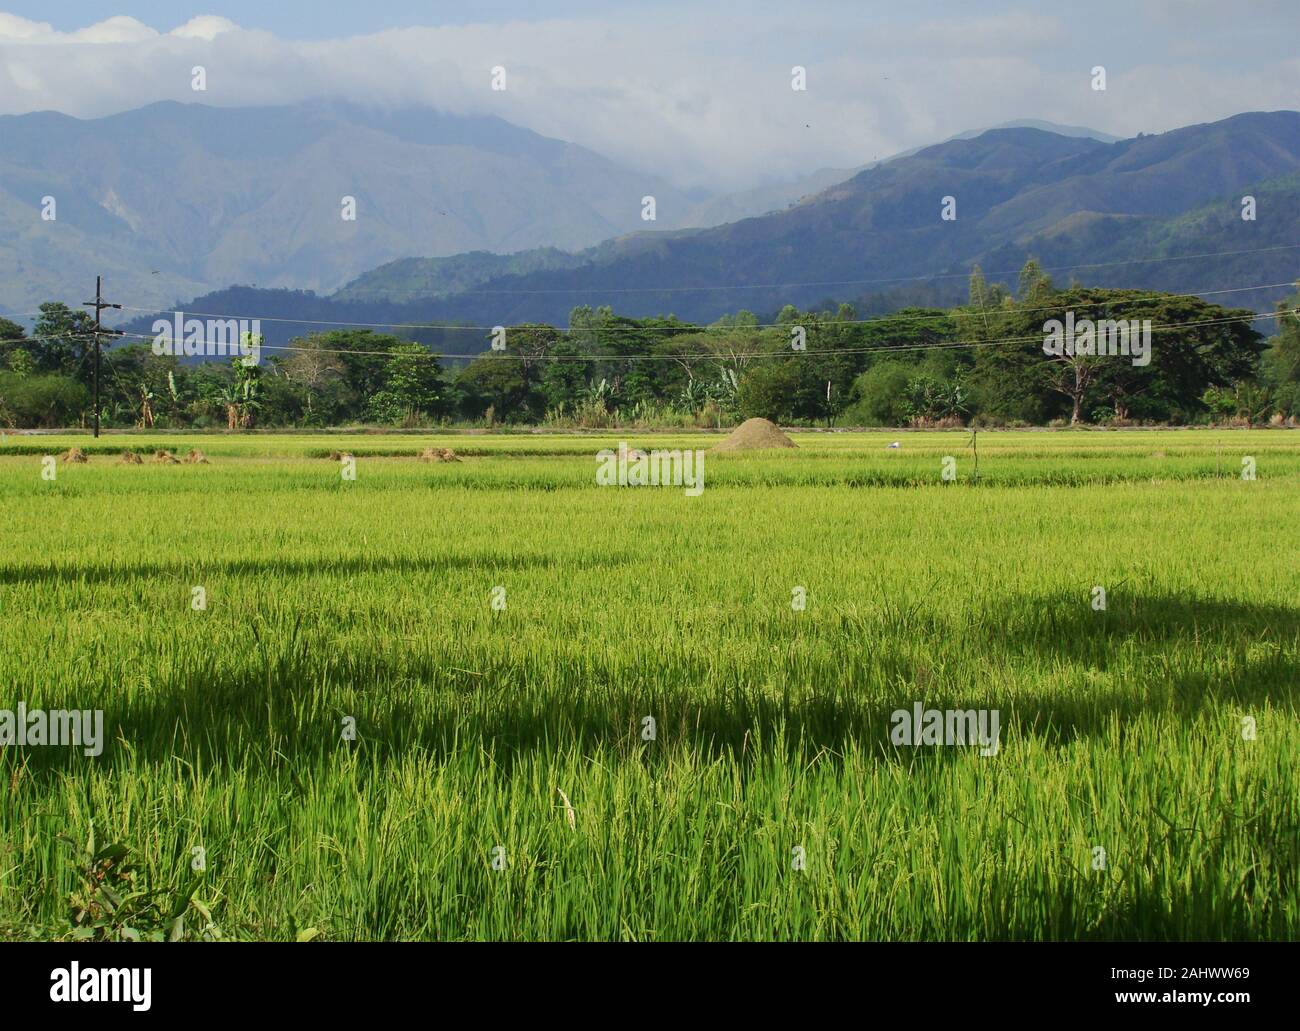 Rice fields in the fertile plains of Mindoro island, The Philippines Stock Photo